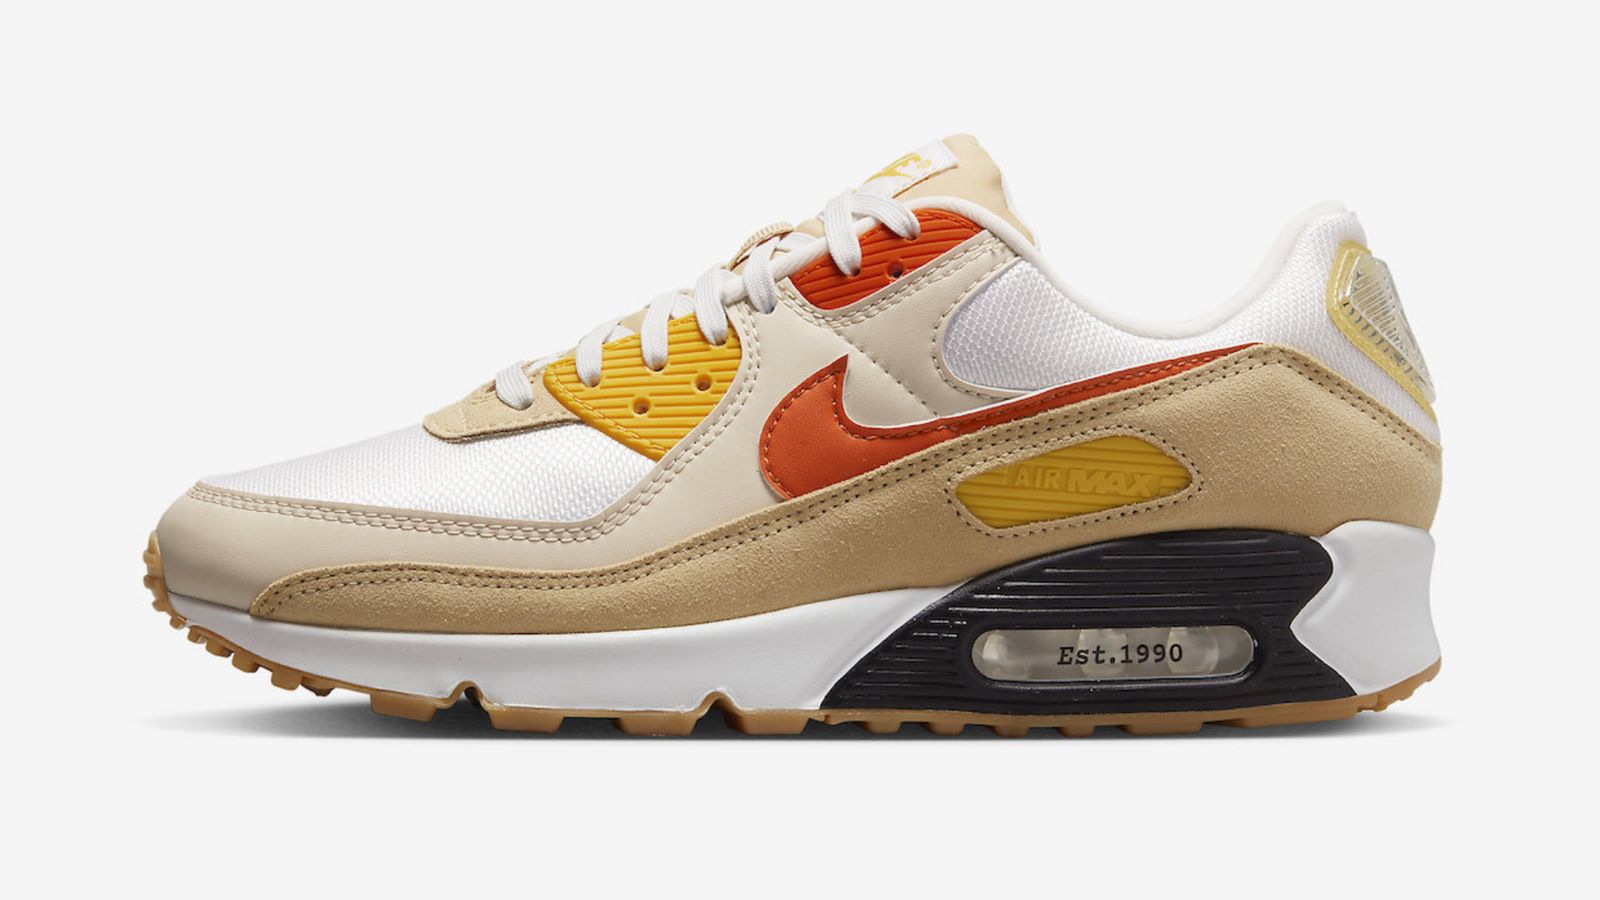 Nike Air Max 90 "Pressure" product image of a Summit White and Sesame sneaker feature orange details and a black and white midsole.